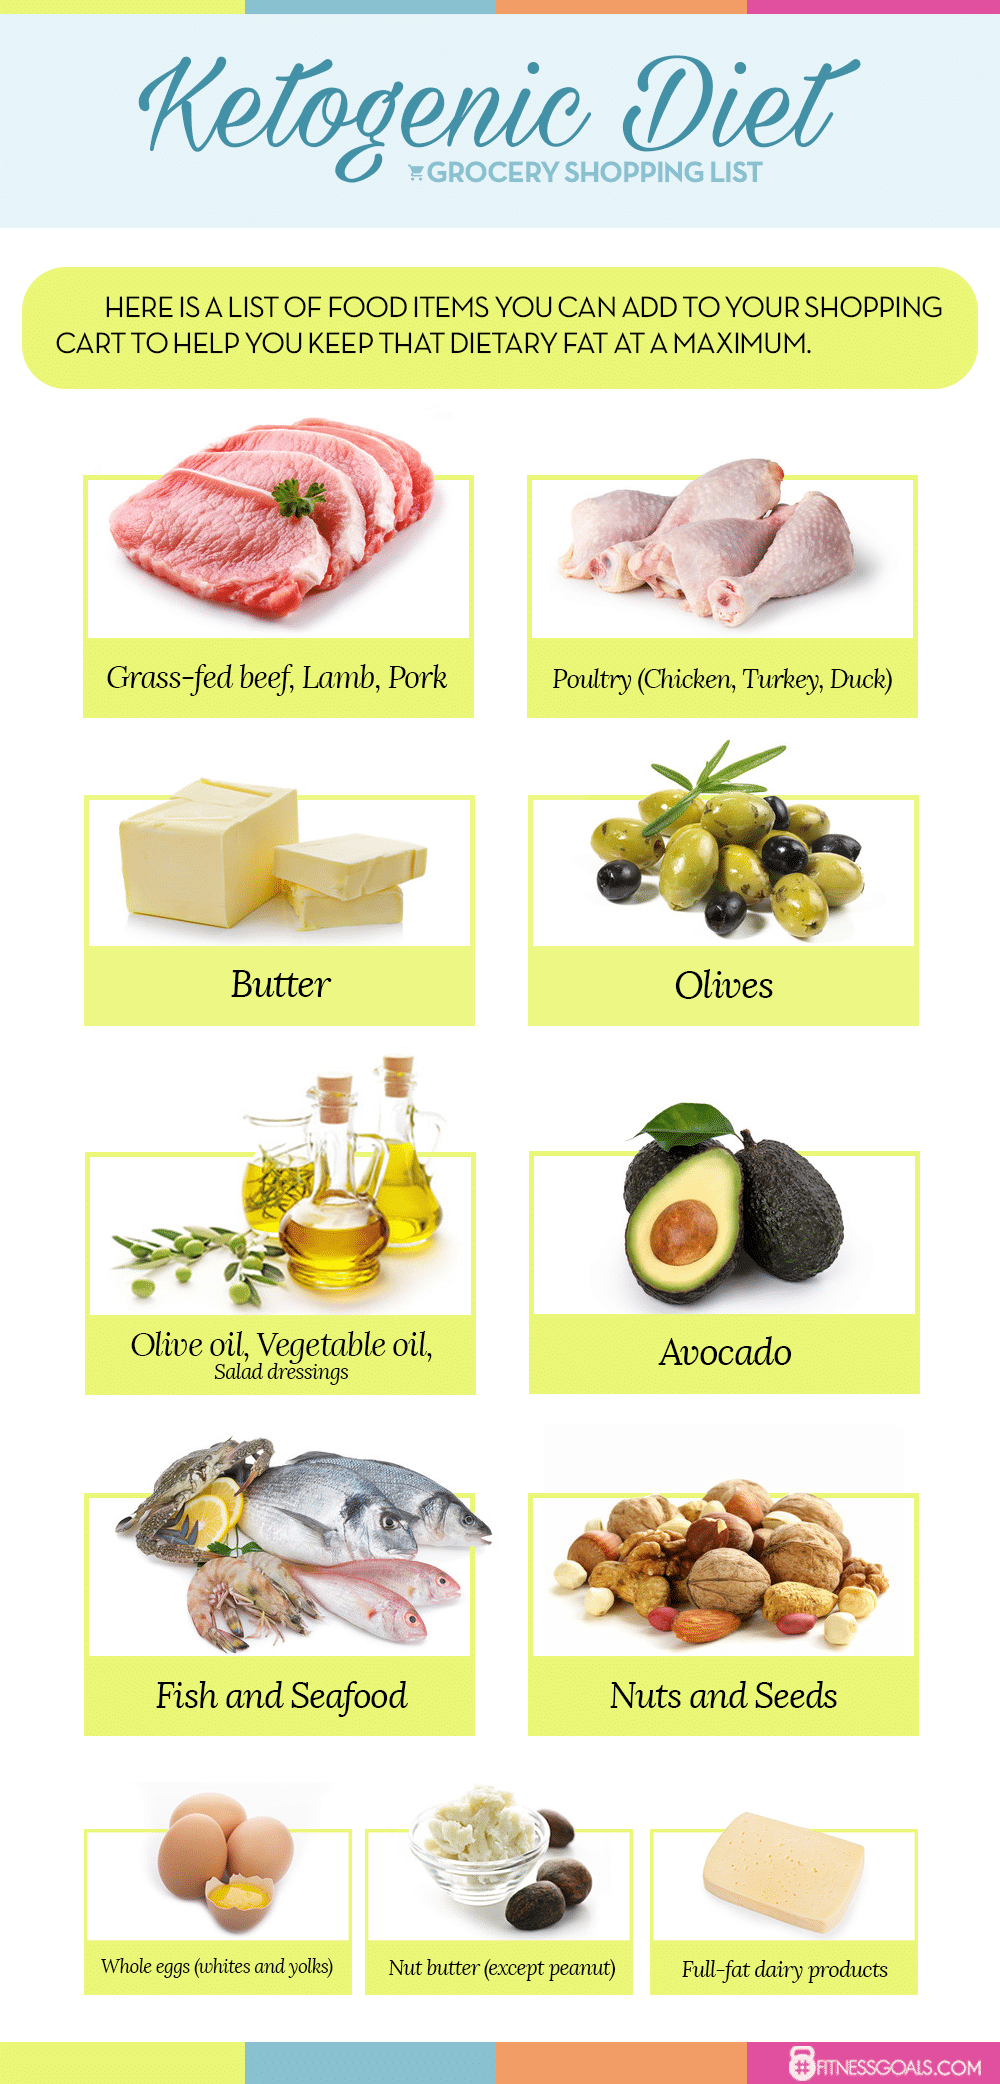 Low-Fat Keto Diet Options: A Guide to Healthy Eating